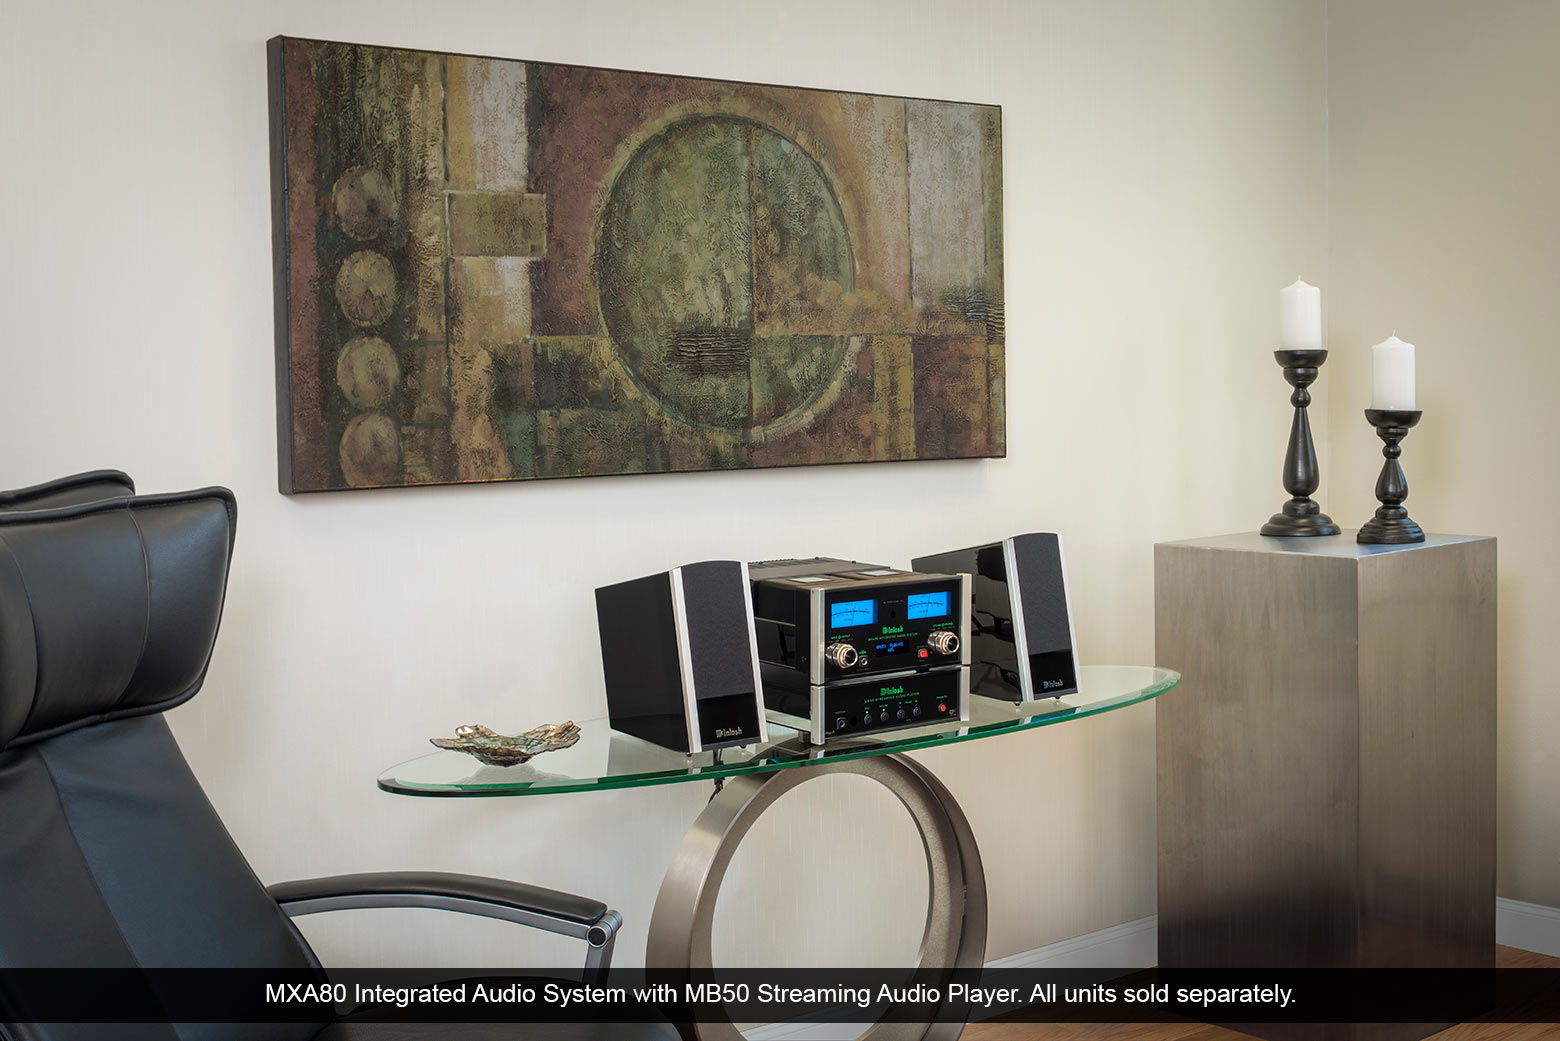 MXA80 Integrated Audio System and MB50 Streaming Audio Player.